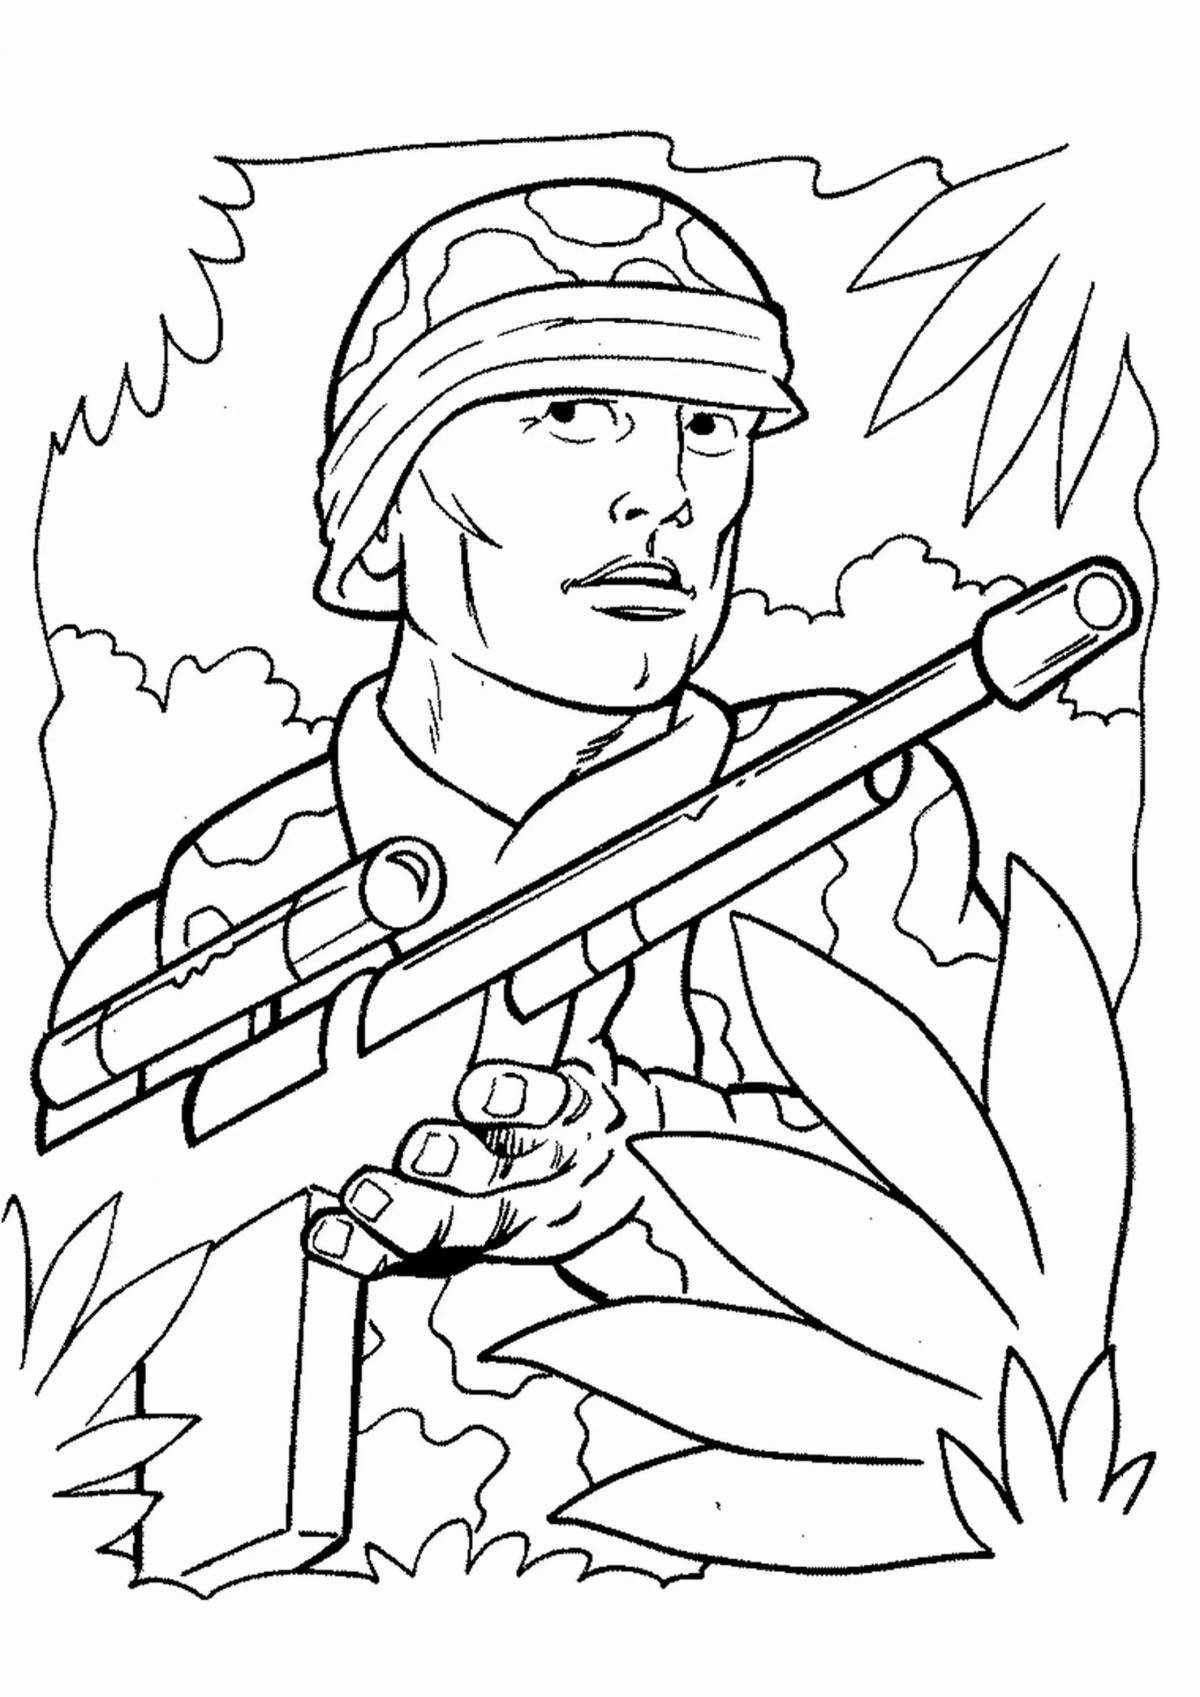 Coloring page dutiful stands guard